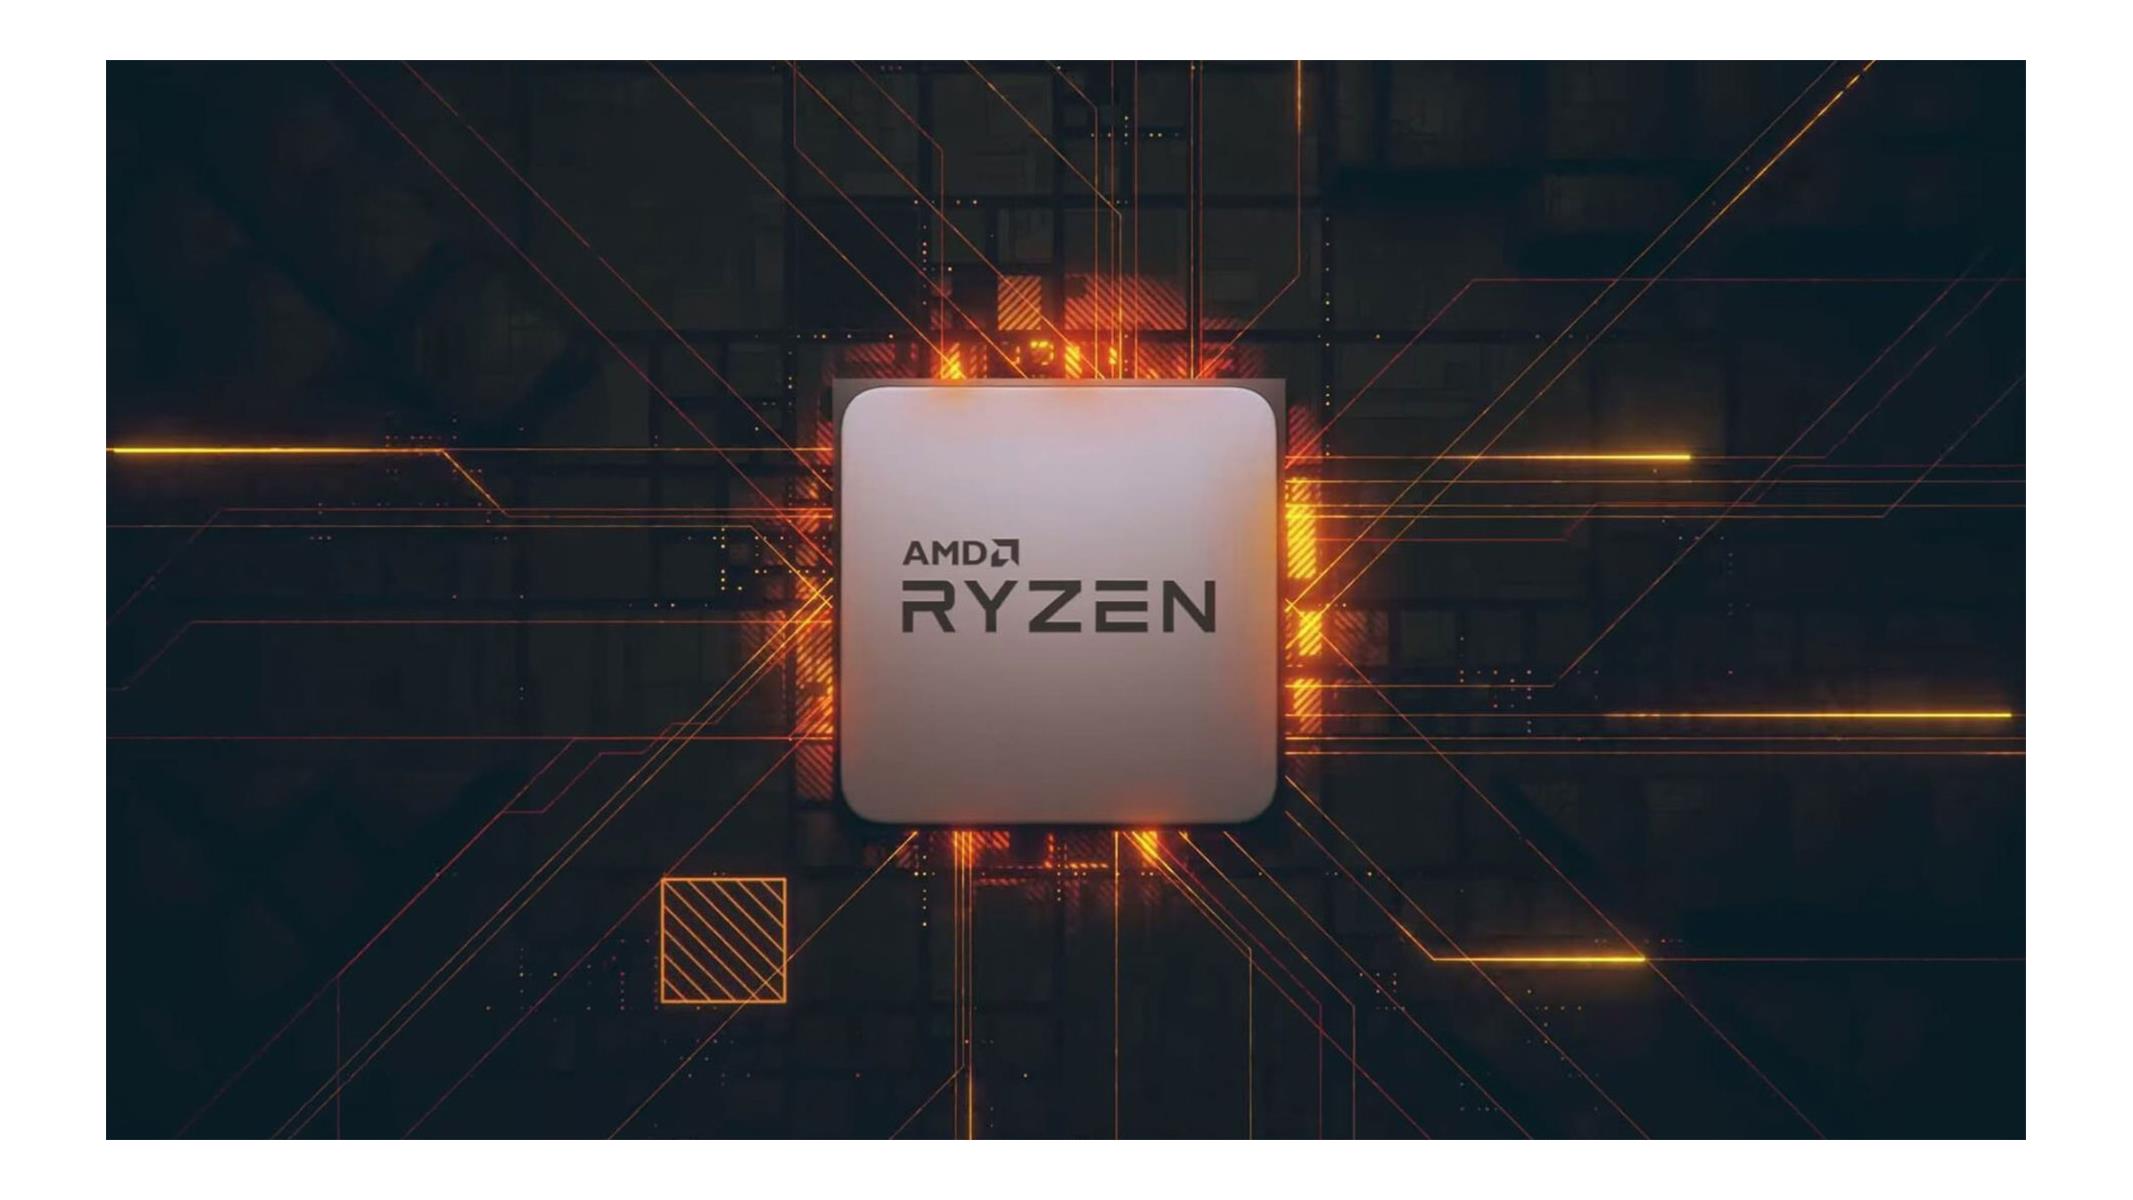 AMD Ryzen CPU And APU Roadmap Through 2022 Leaks, DDR5 And USB4 Support  Incoming | HotHardware